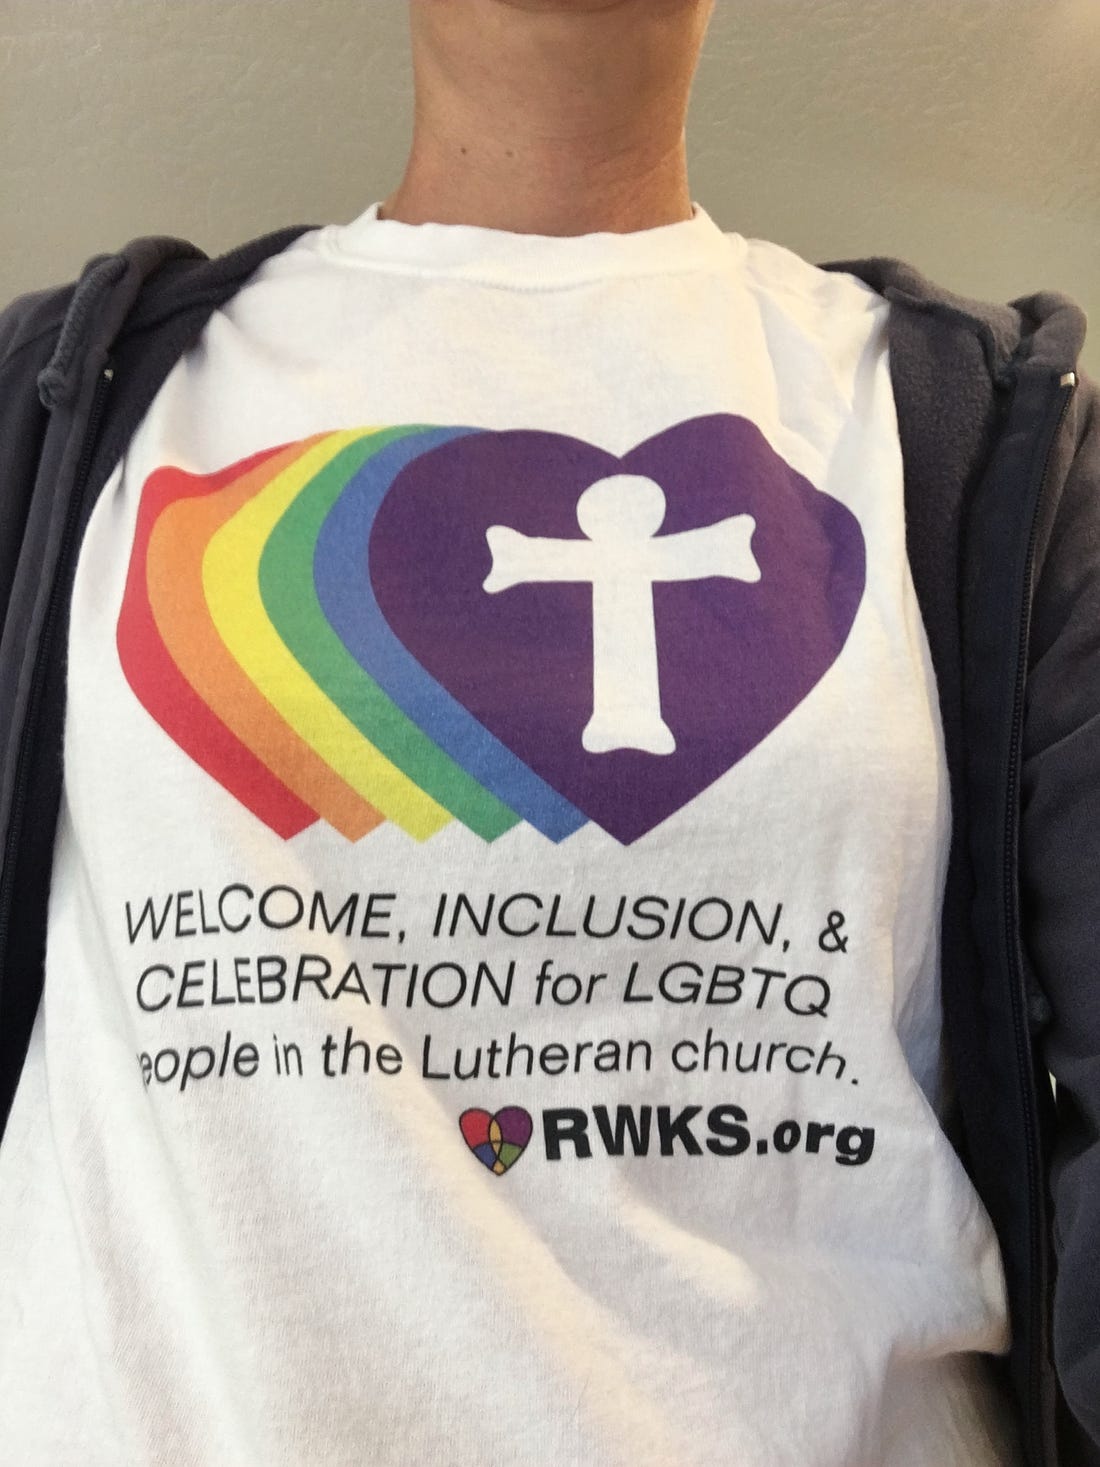 Photo of a t-shirt front with rainbow hearts in a row and the last one has a cross inside it.